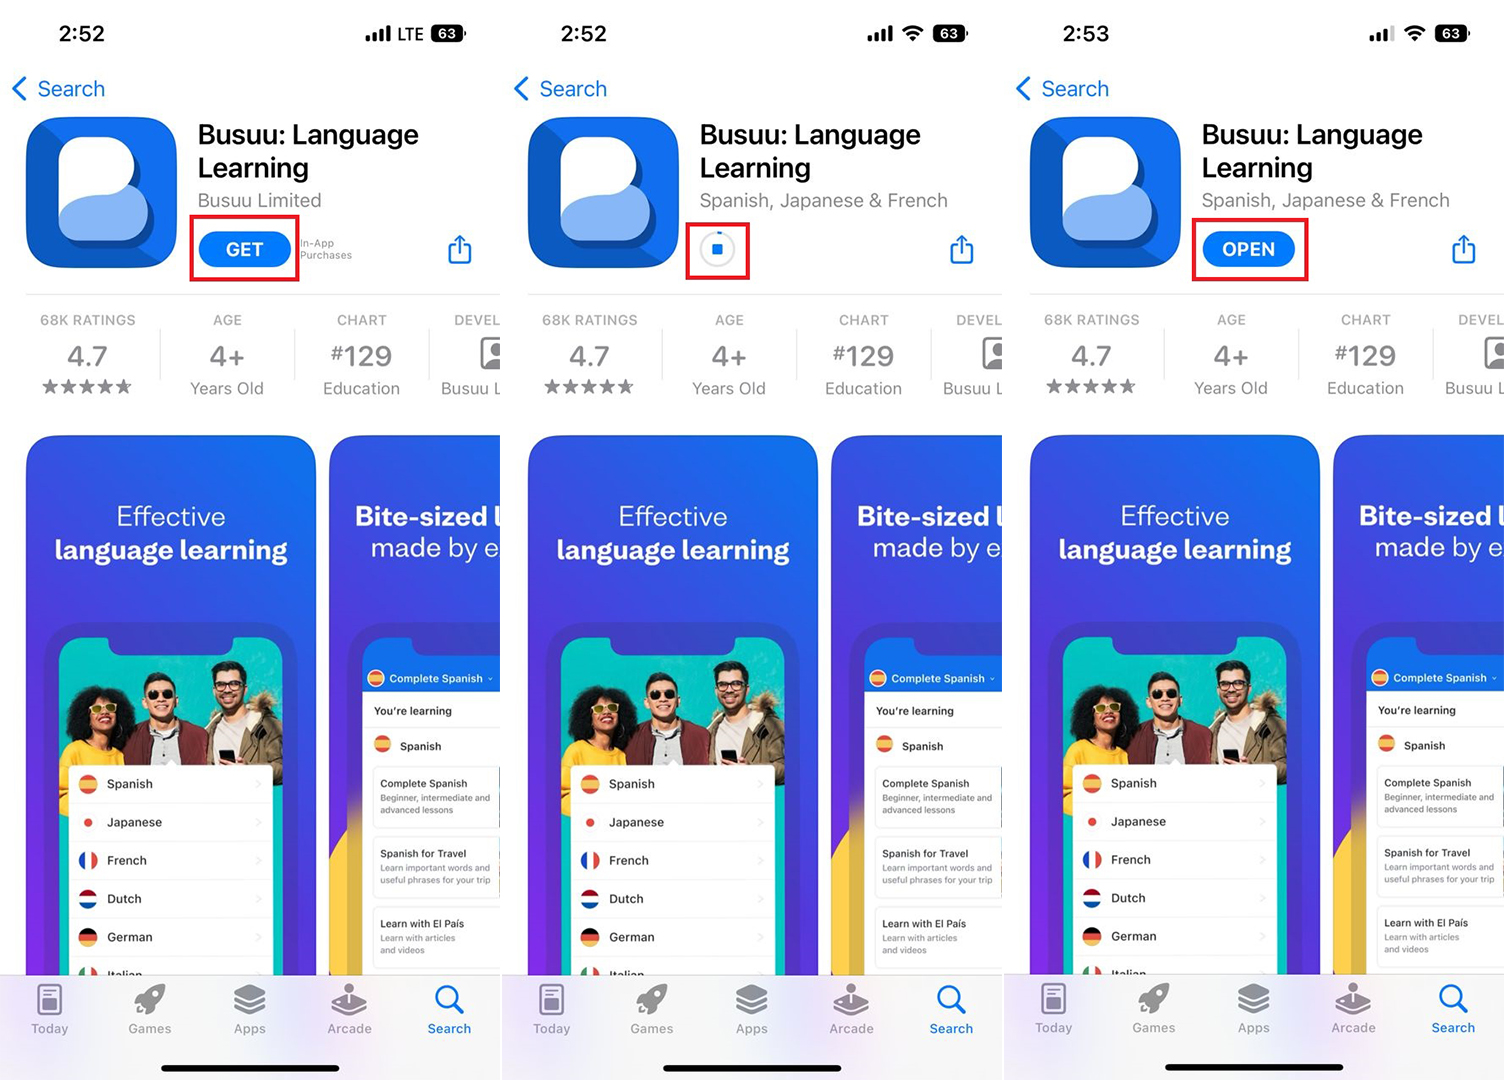 2-How to install the app from the App Store